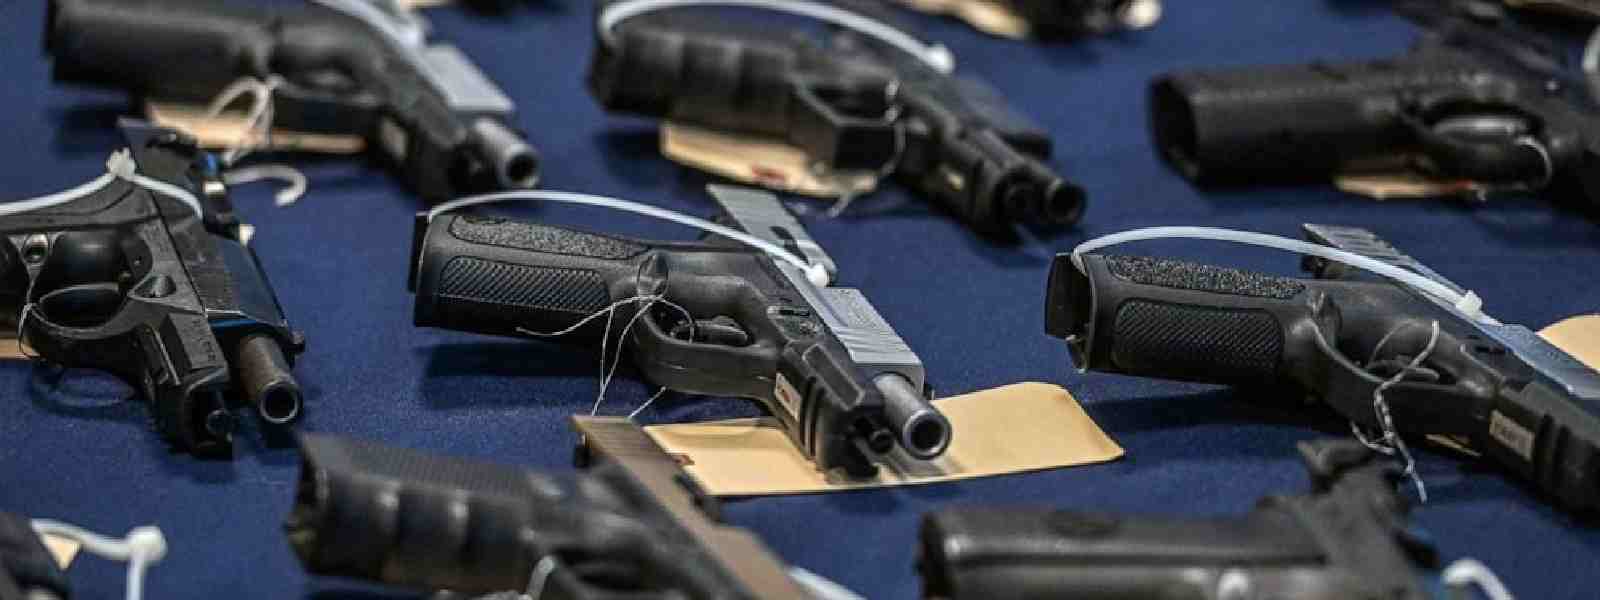 Over 1,000 illegal weapons seized in past 3 years